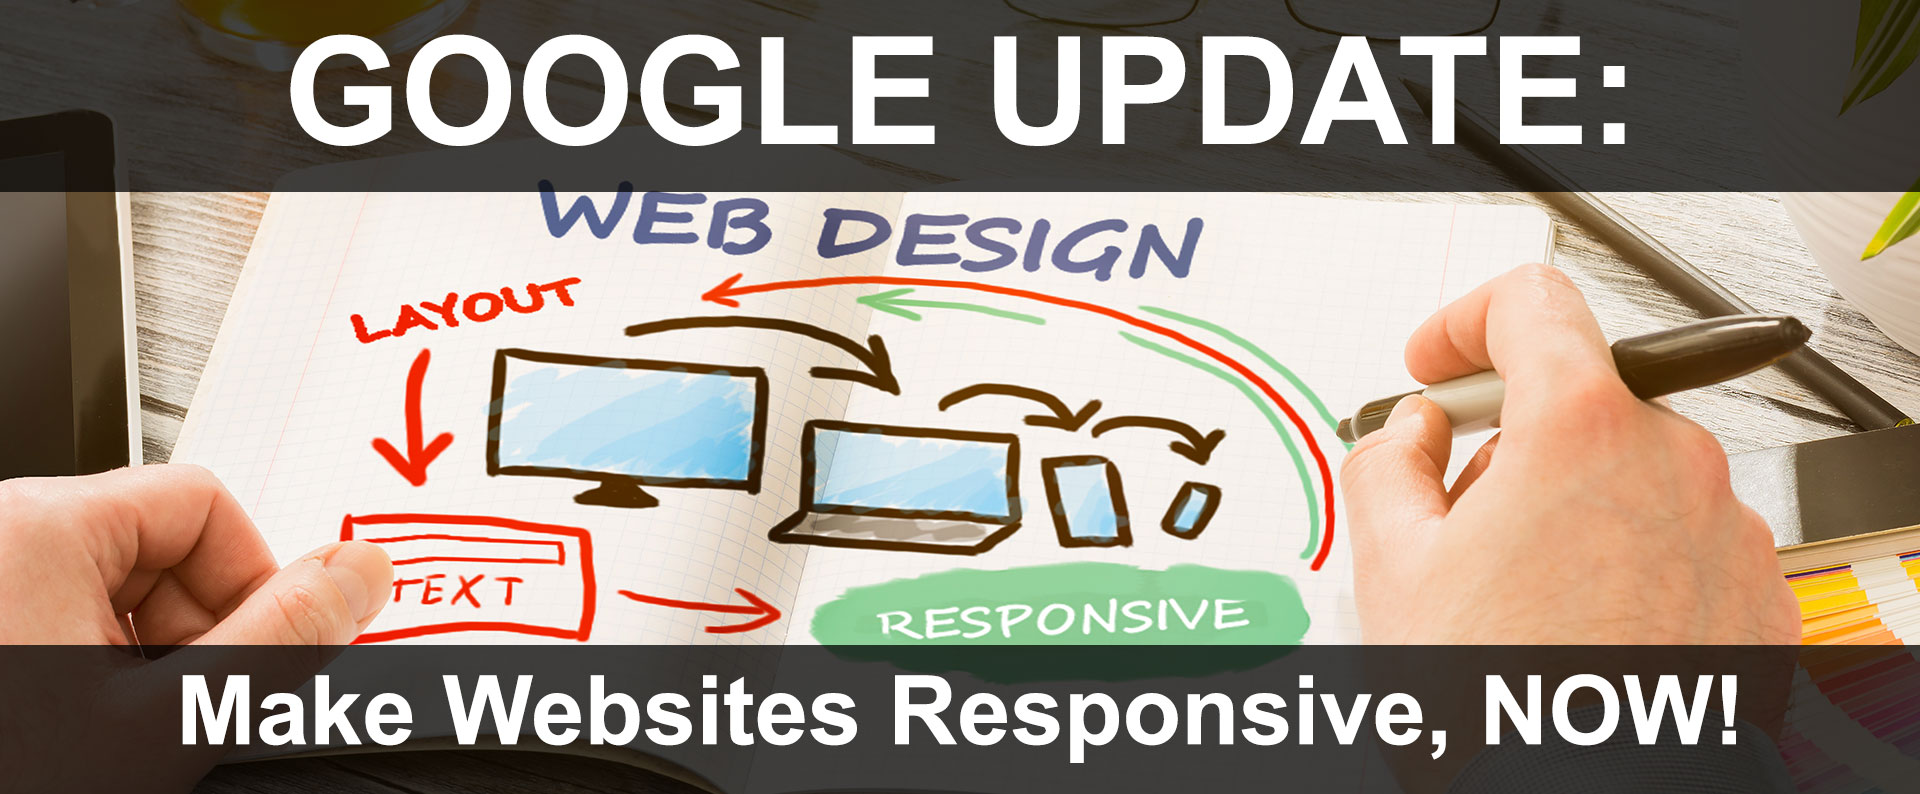 One Responsive Website Is The Answer To Google's Upcoming Mobile-First Indexing Update!